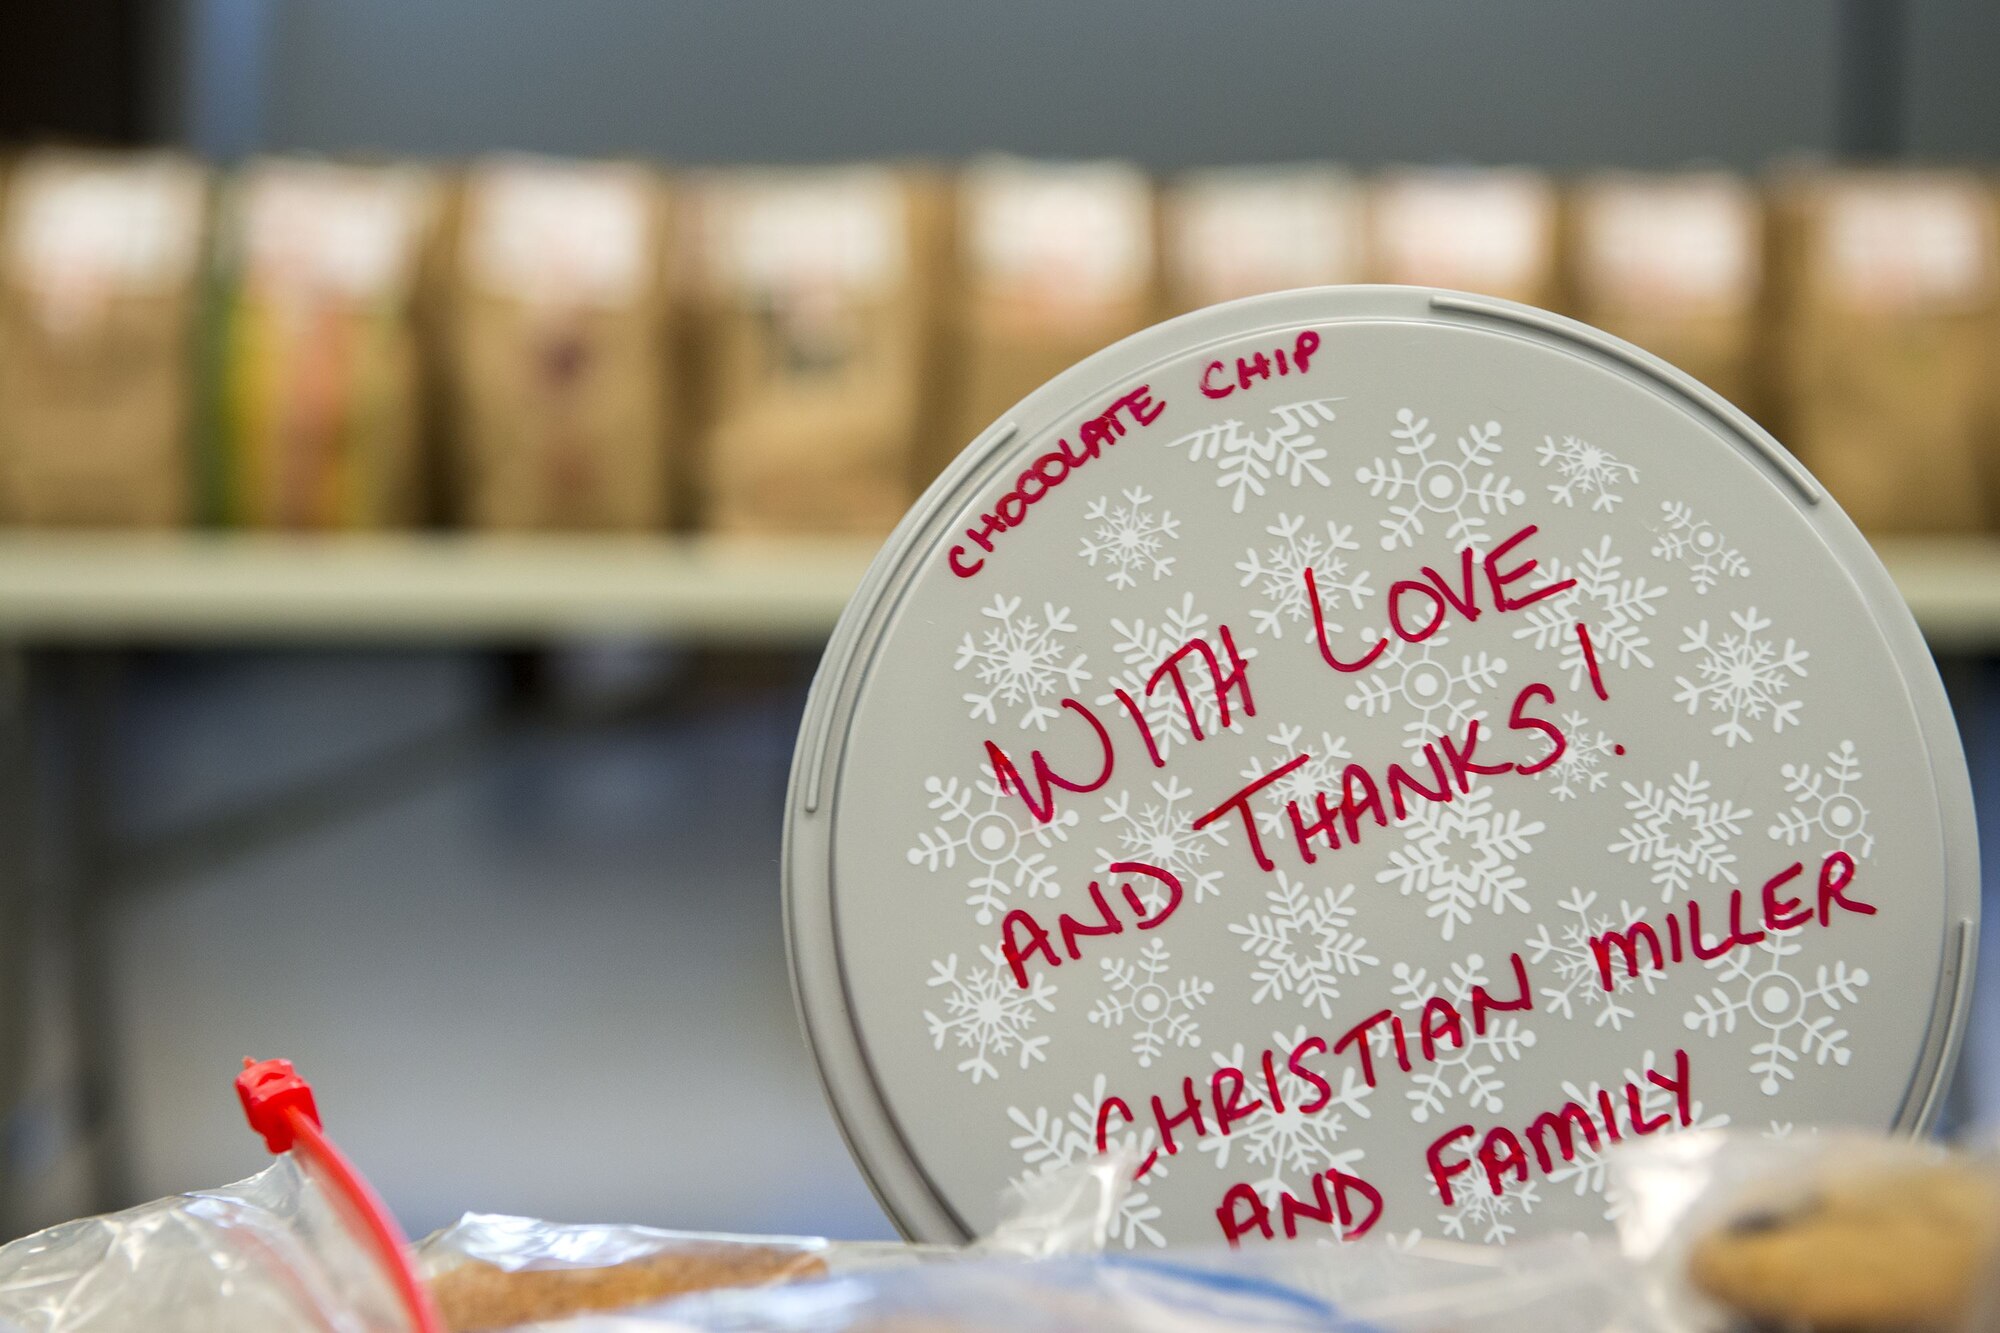 A cookie tub rests on a table during the Annual Moody Airmen Cookie Drive, Dec. 4, 2017, at Moody Air Force Base, Ga. Local organizations, Airmen and spouses donated more than 8,000 cookies to approximately 700 dorm residents to show appreciation for the Airmen during the holidays. (U.S. Air Force photo by Airman 1st Class Erick Requadt)